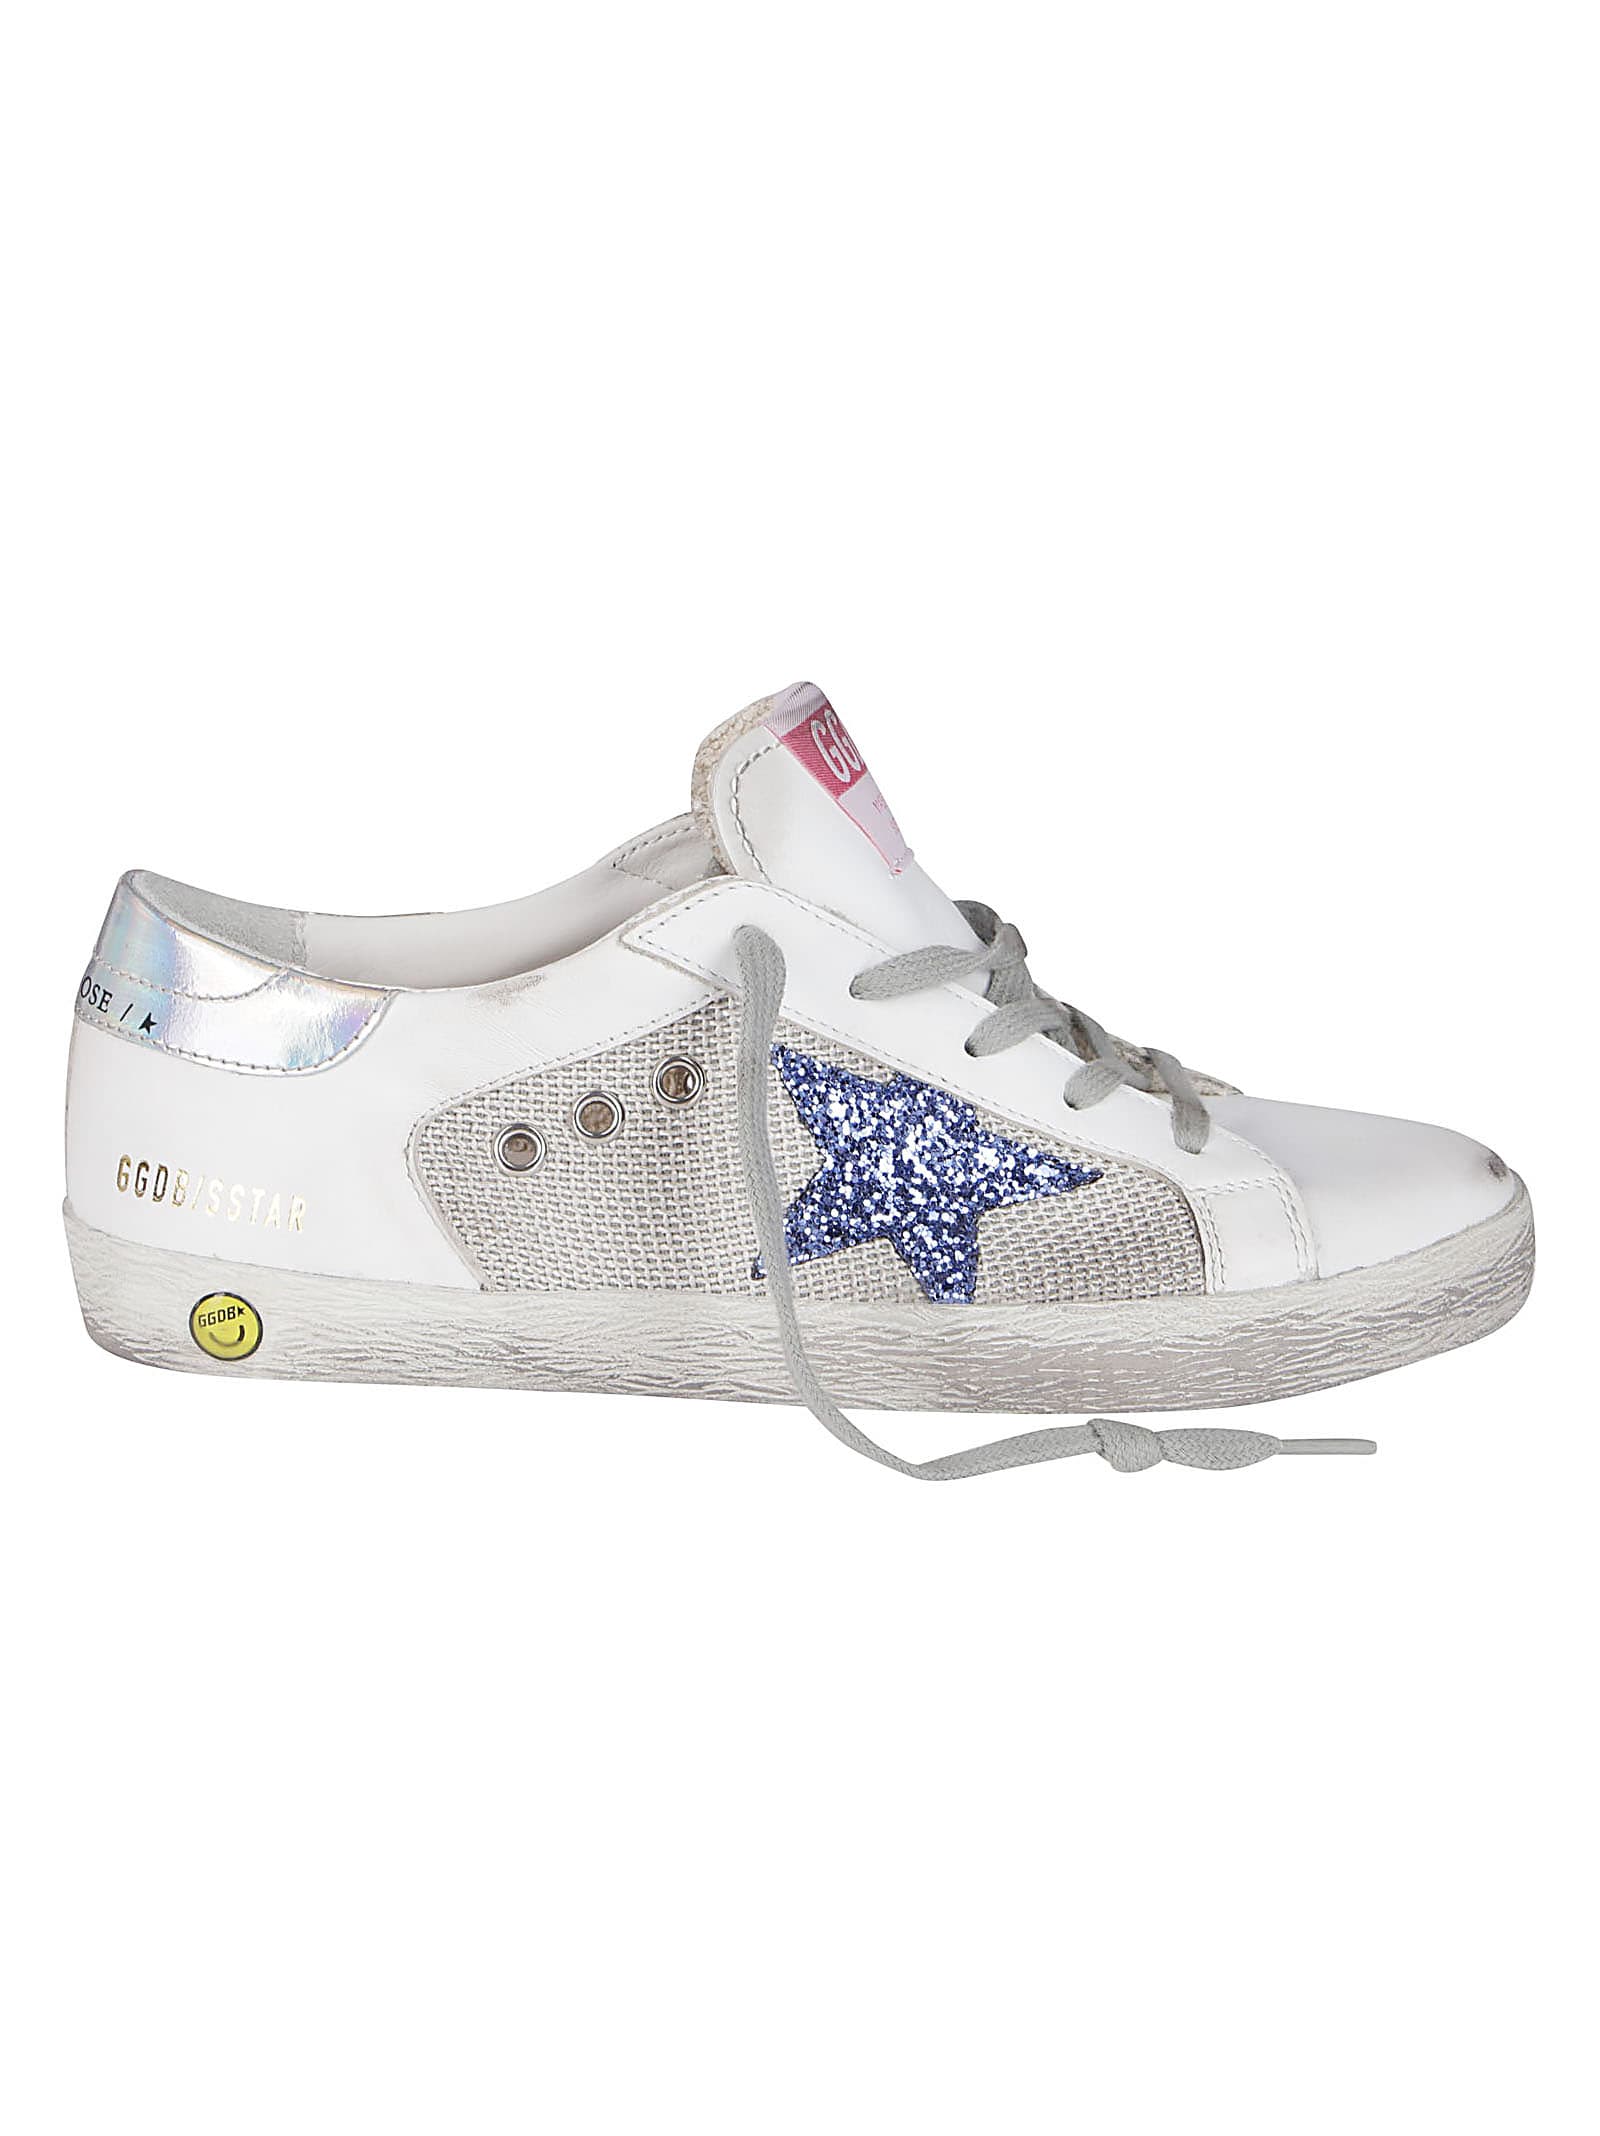 Buy Golden Goose White Leather Super-star Sneakers online, shop Golden Goose shoes with free shipping